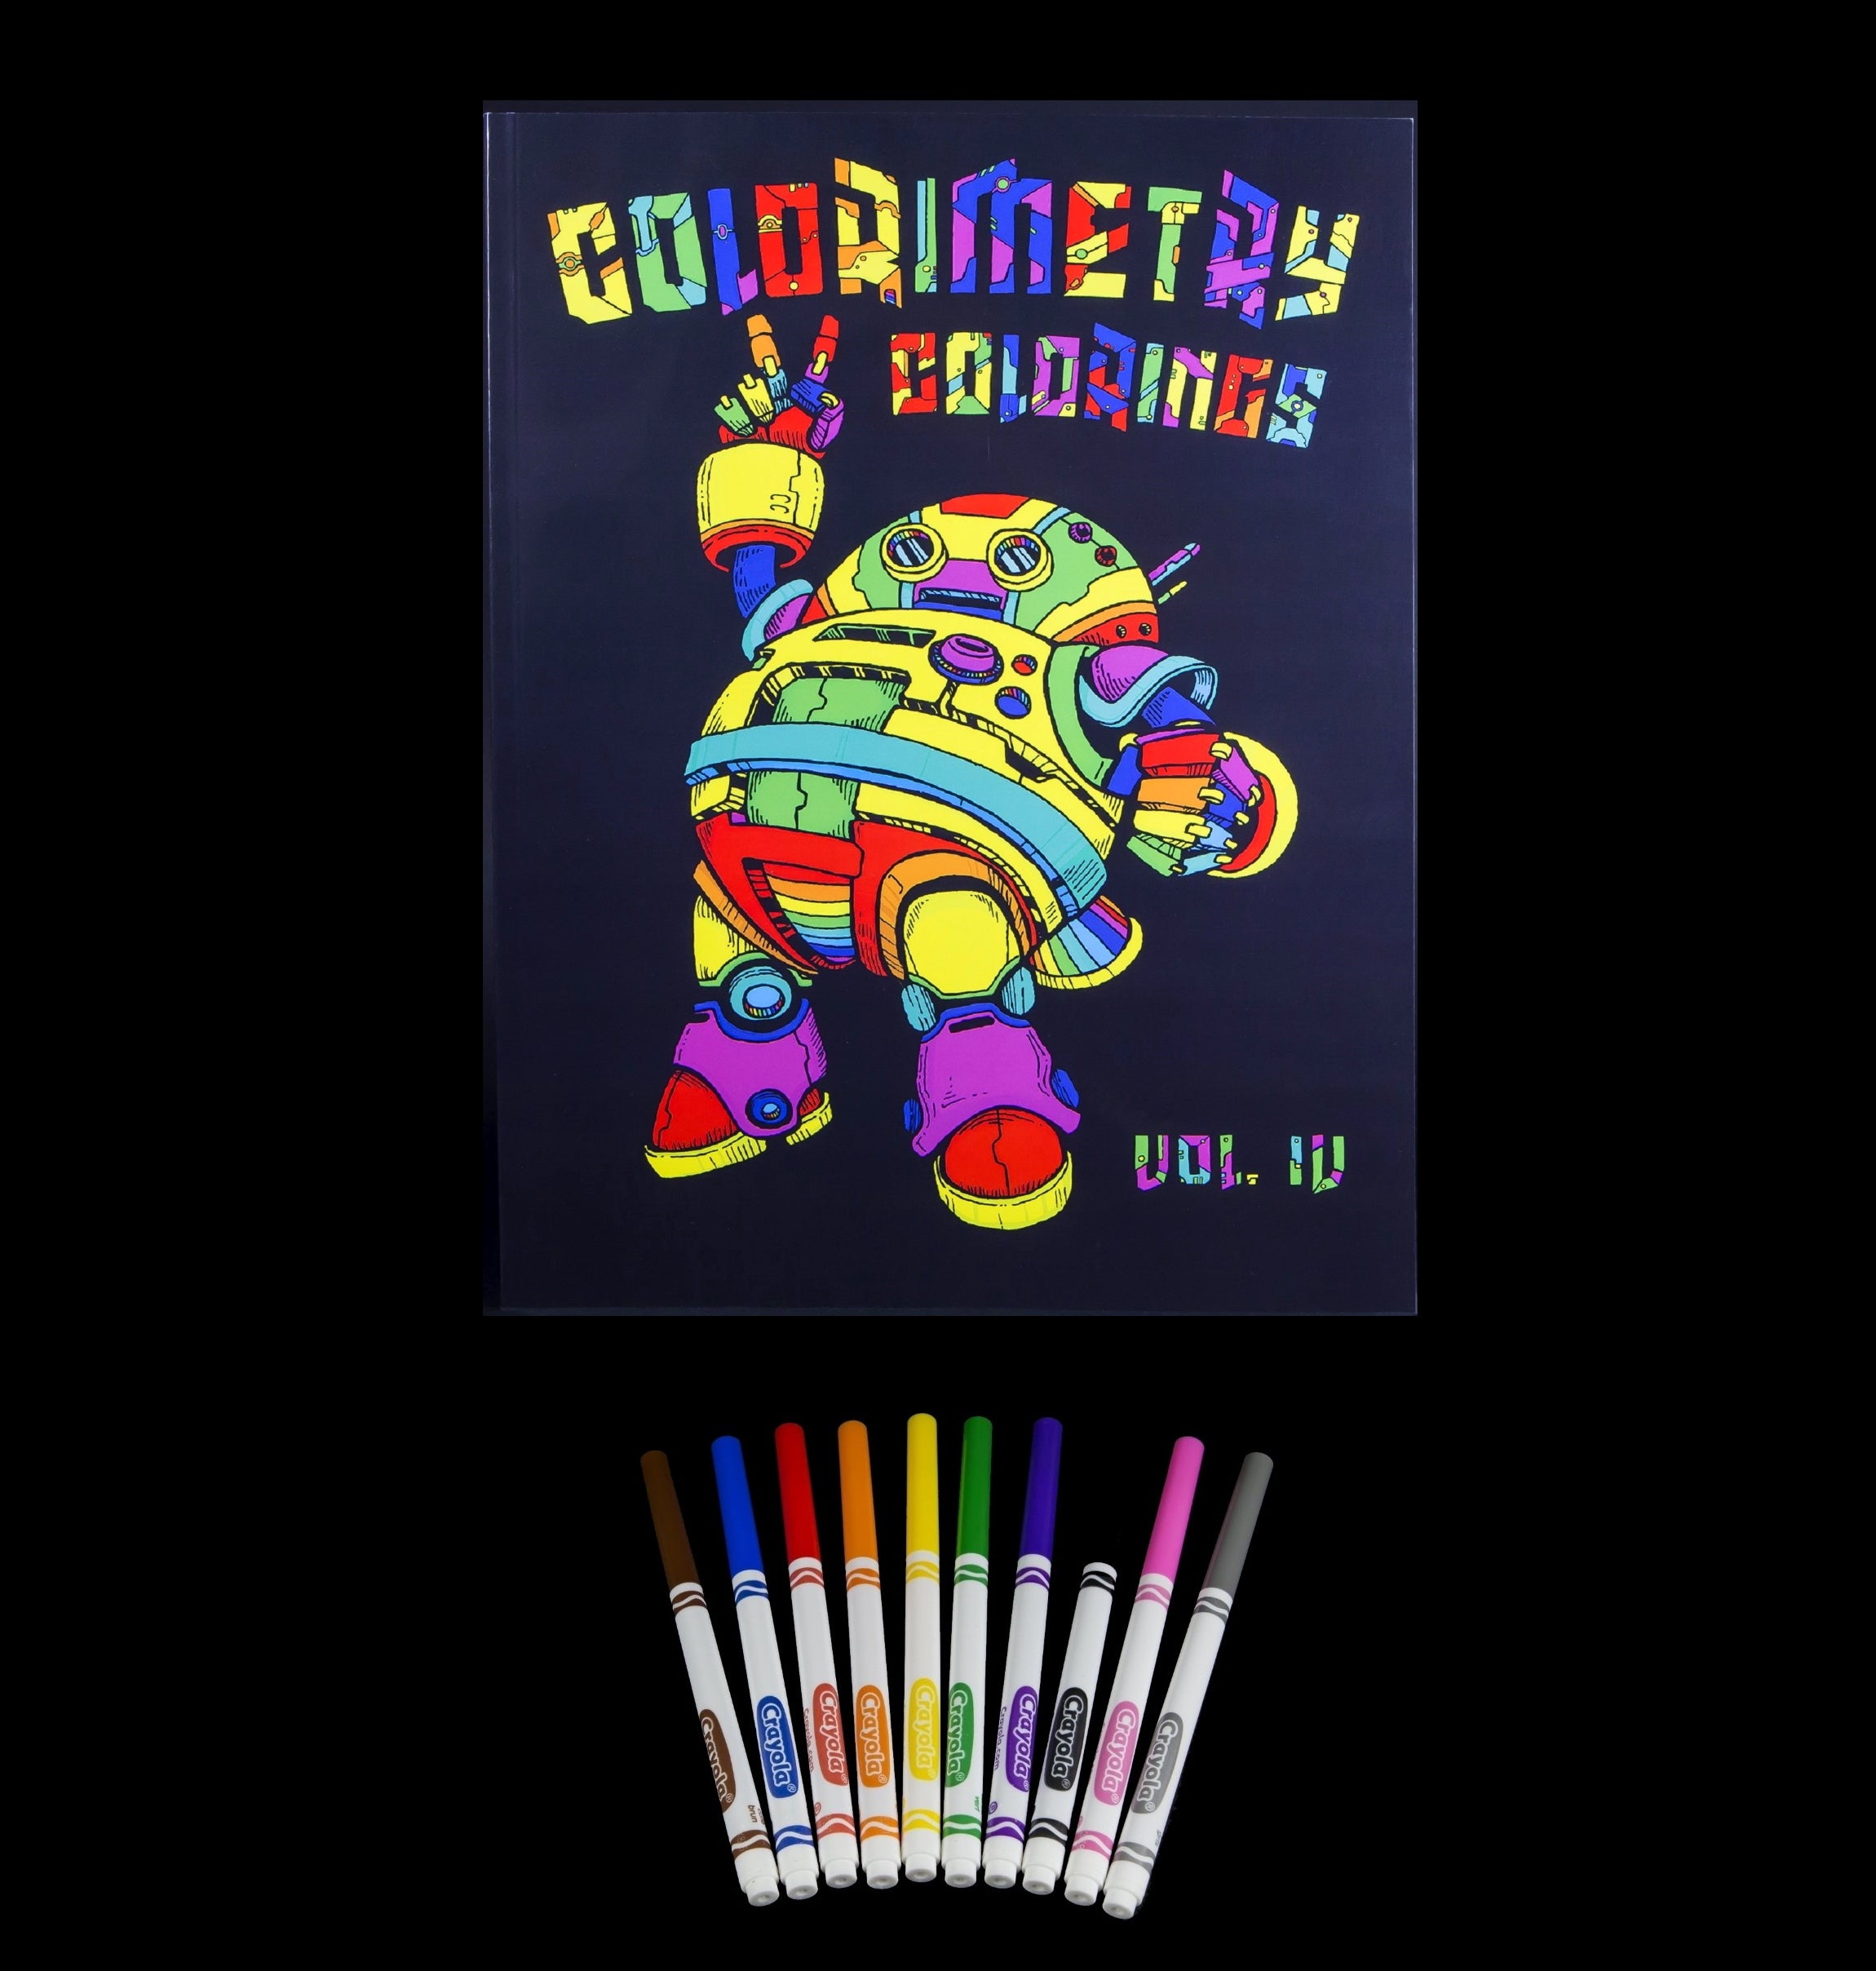 Thick Paper One Side Coloring Books for Markers? : r/Coloring